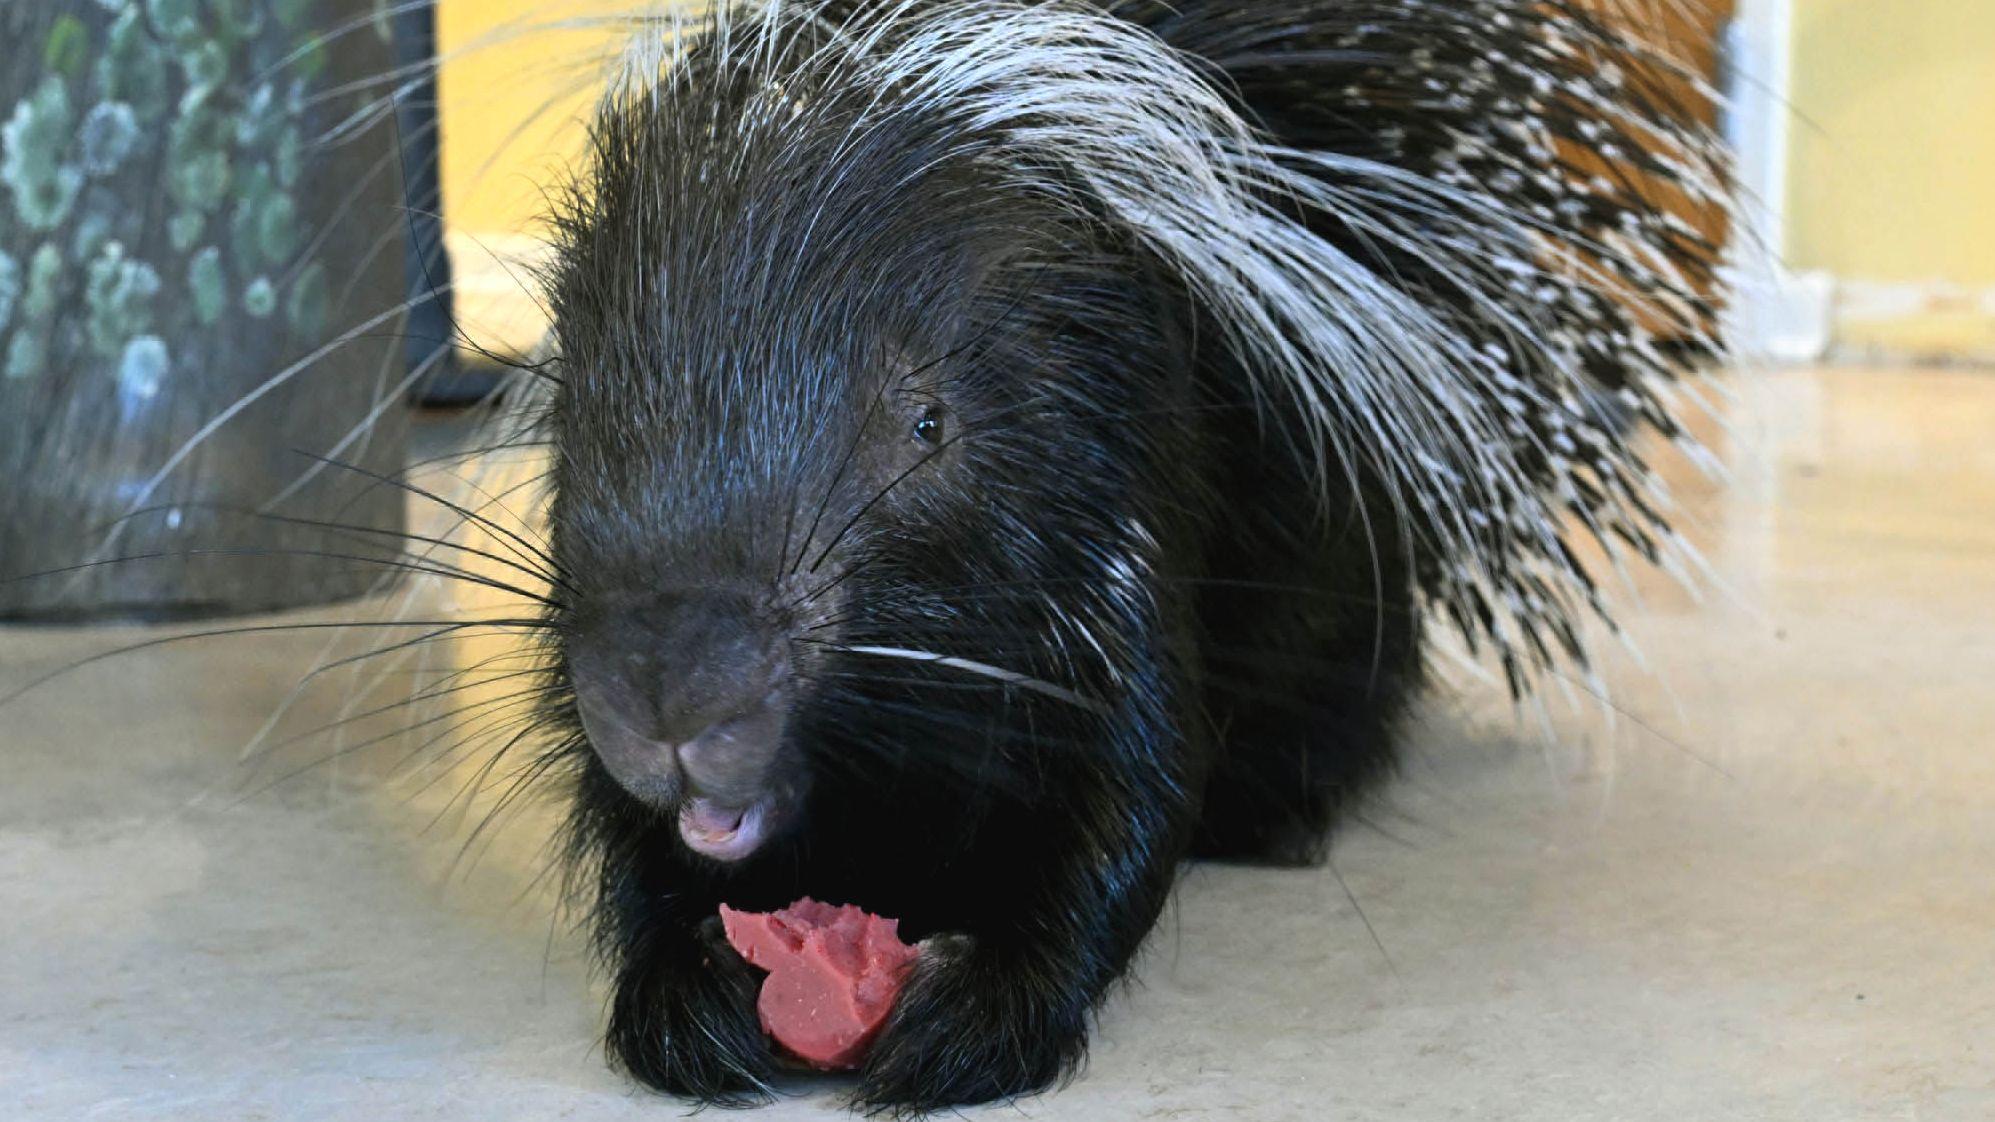 Norman, a Cape porcupine, received heart-shaped treats made of biscuit and gelatin. (Jim Schulz / CZS-Brookfield Zoo)